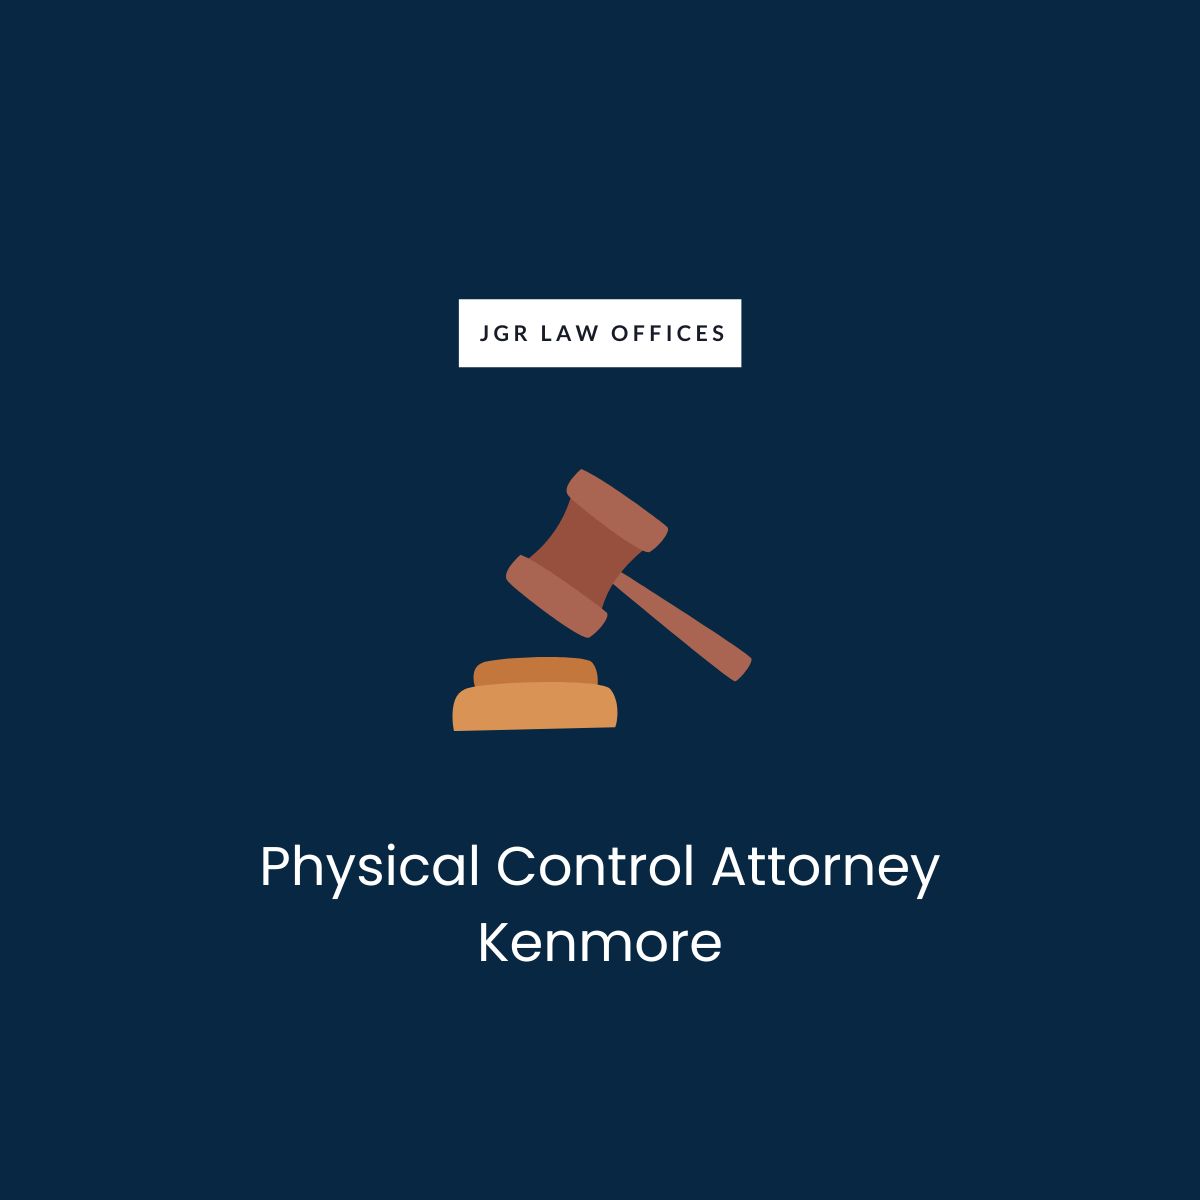 Physical Control Lawyer Kenmore Physical Control Physical Control